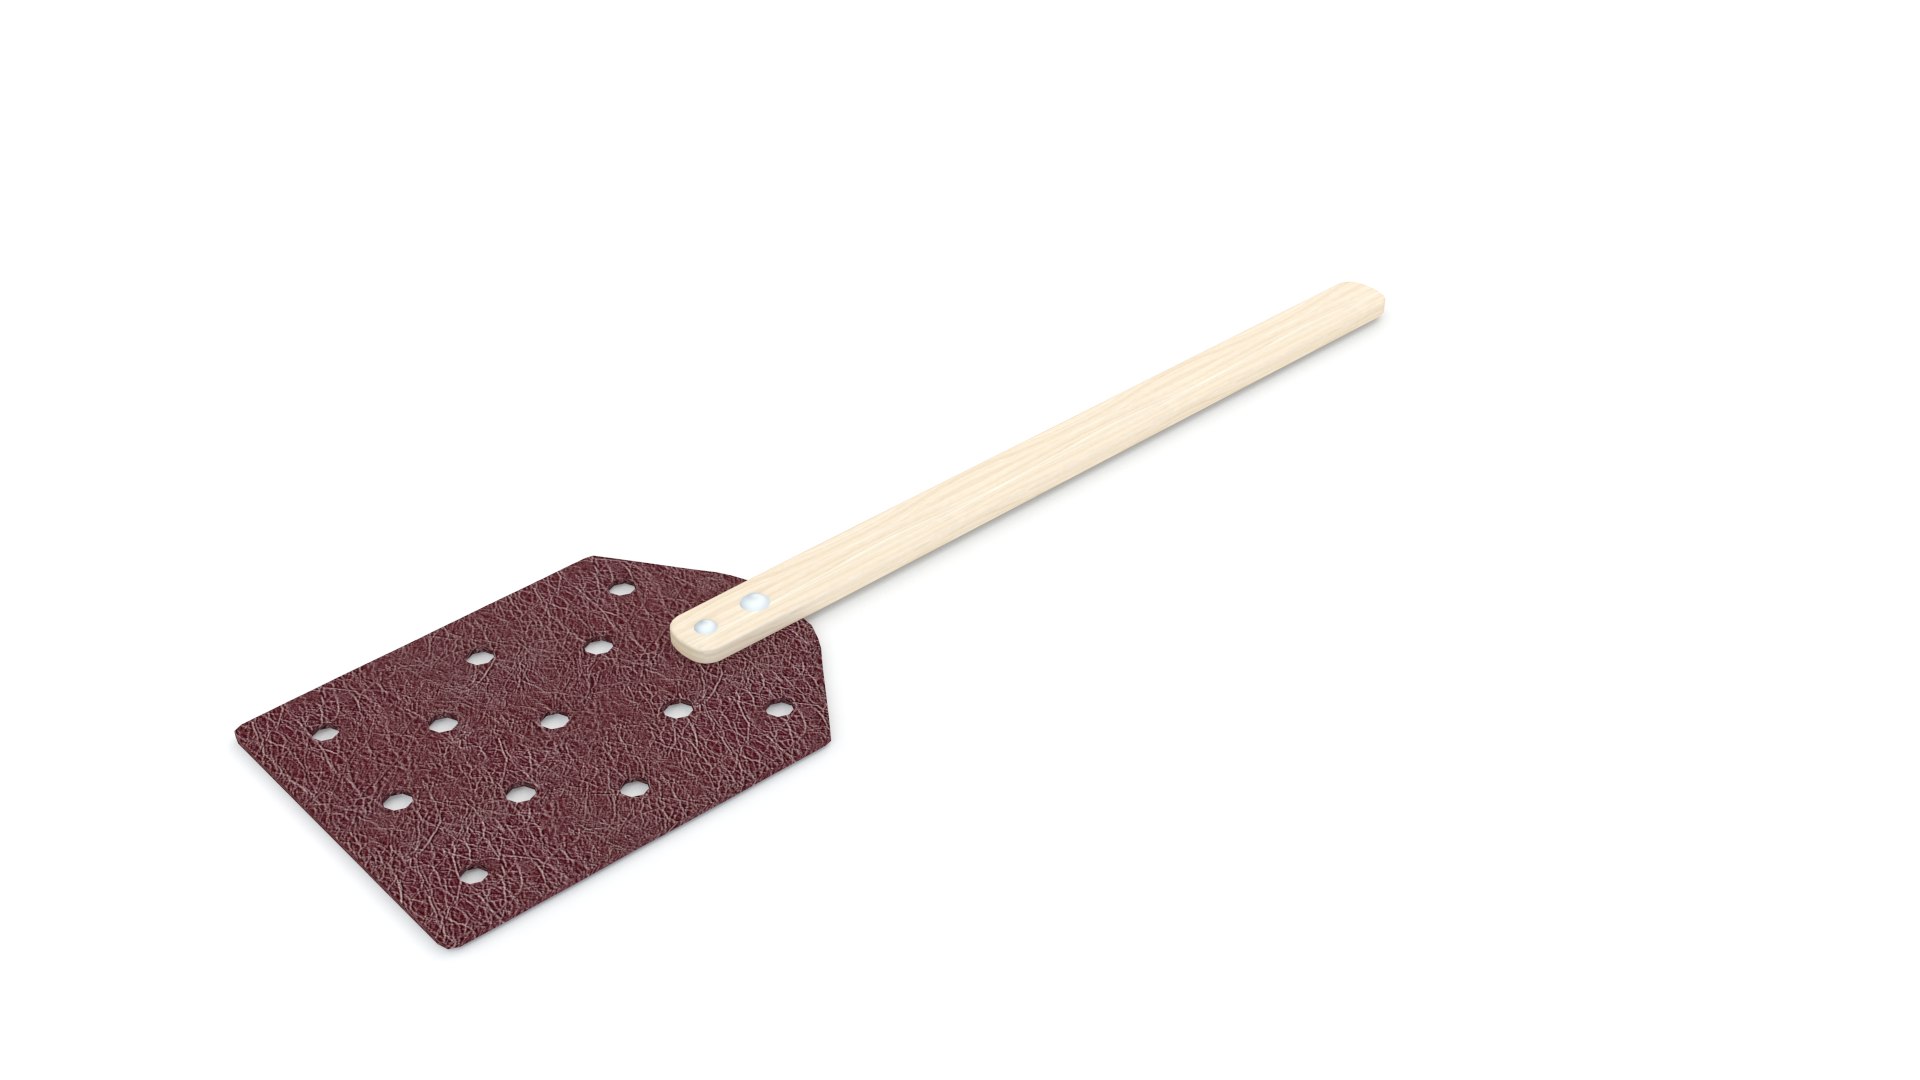 Leather fly swatter 3D model - TurboSquid 1488148